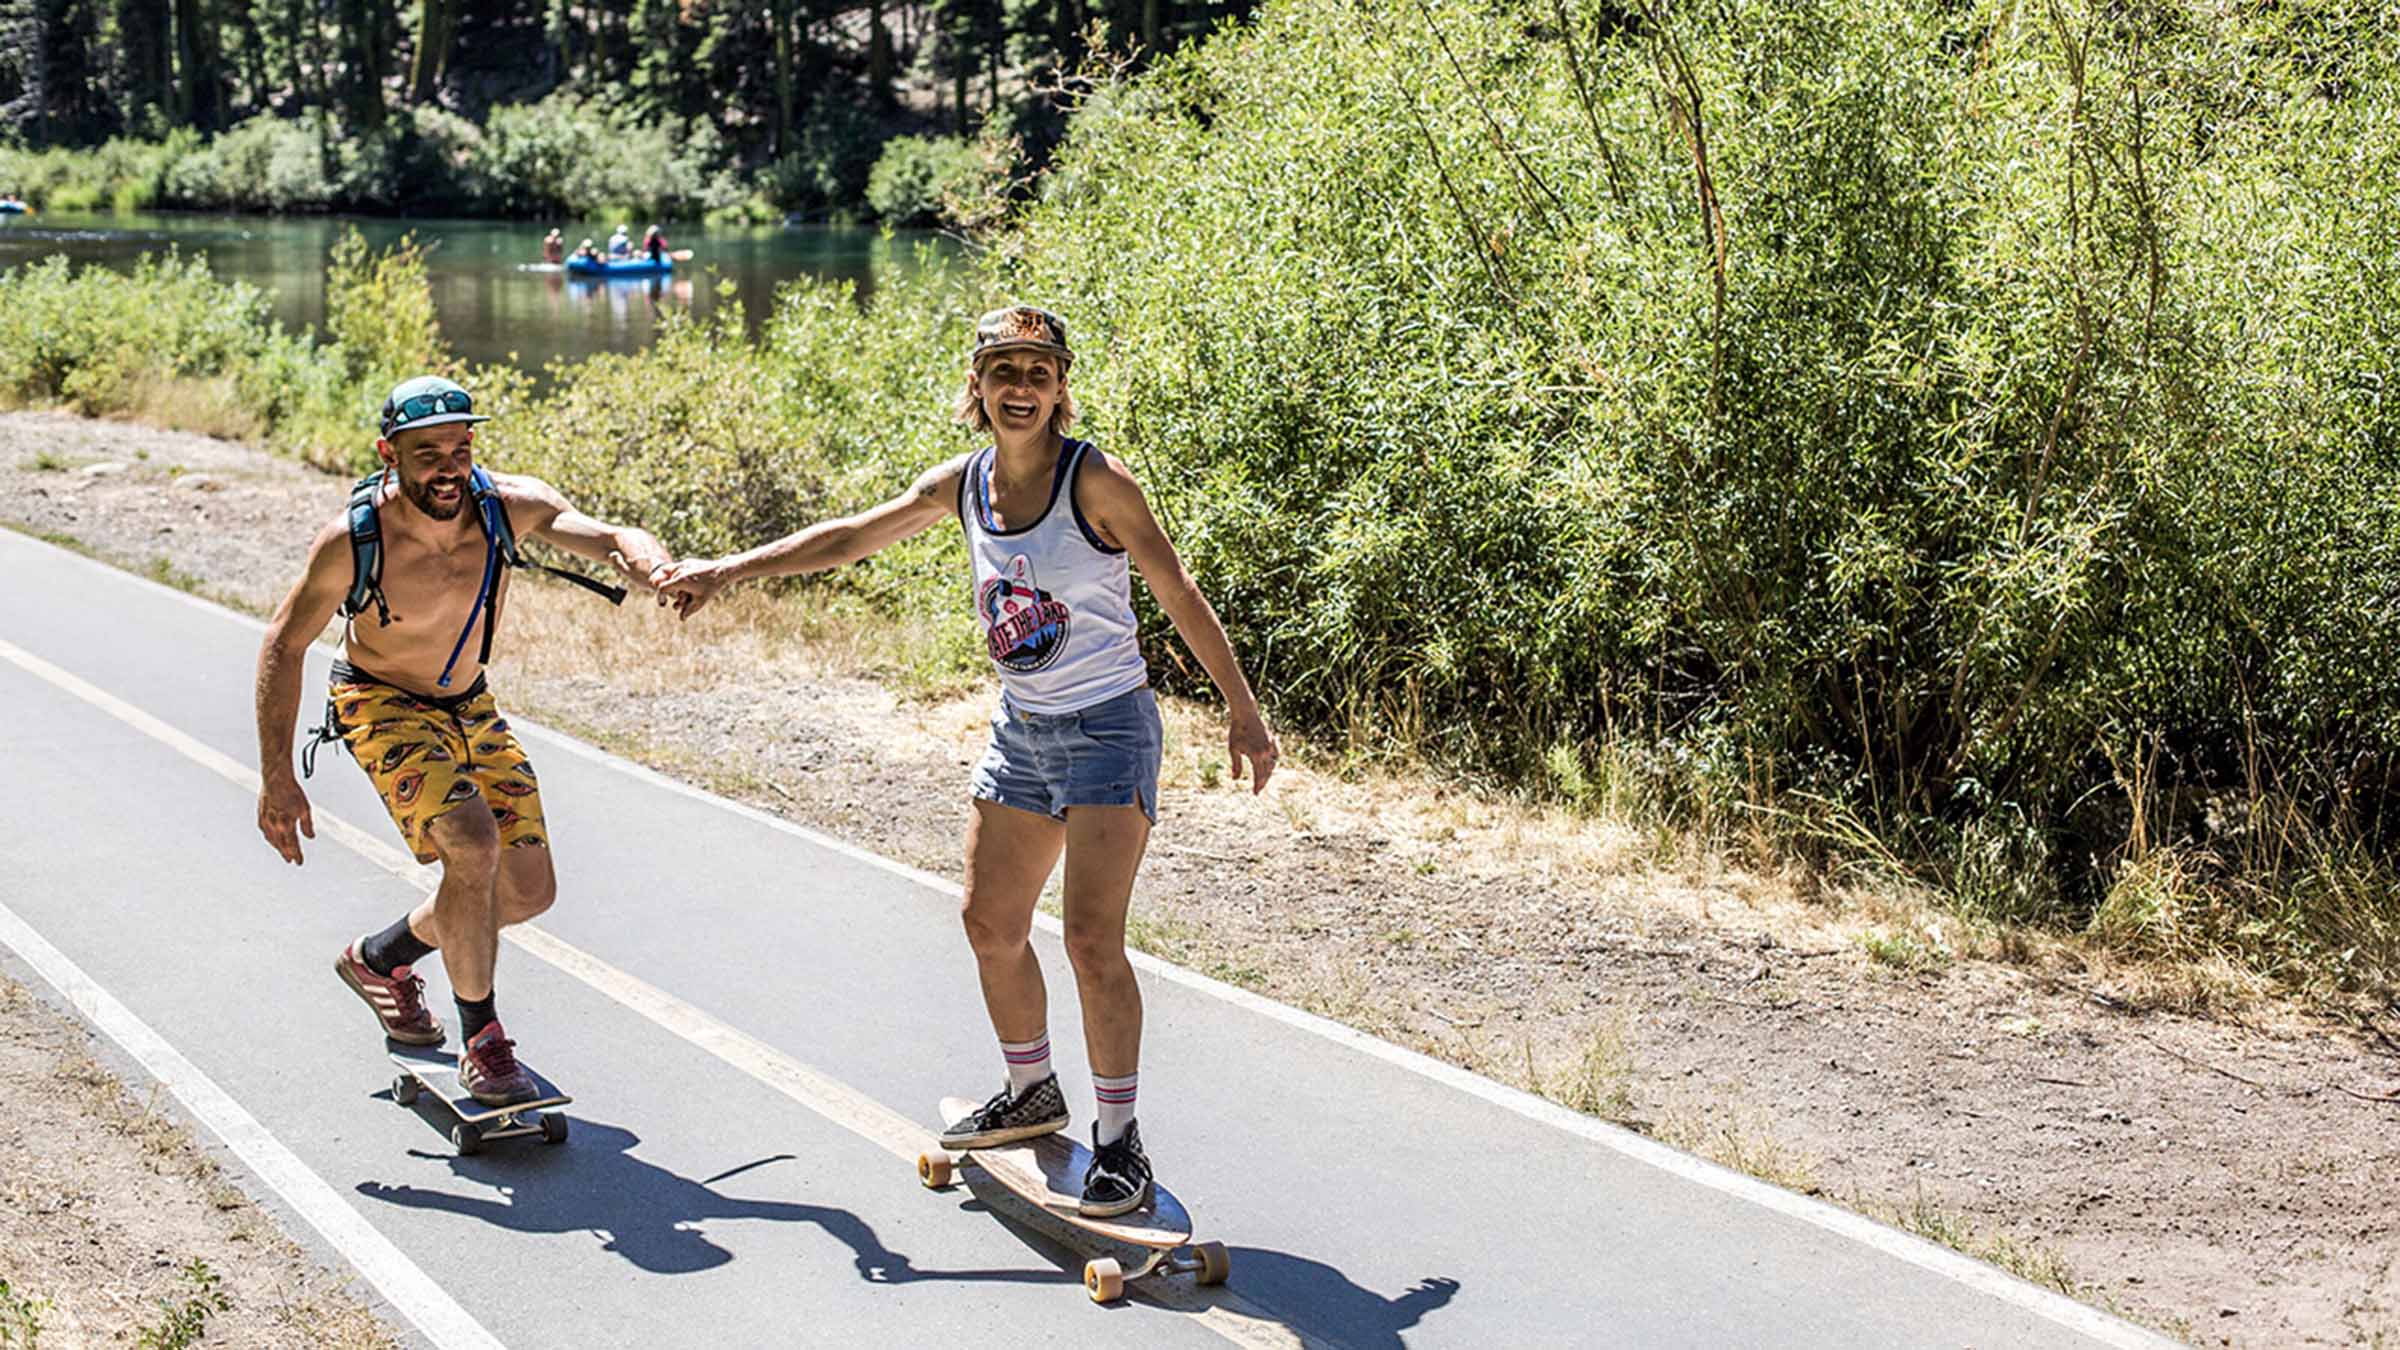 A couple skateboards down the Truckee River Bike Path in North Lake Tahoe.